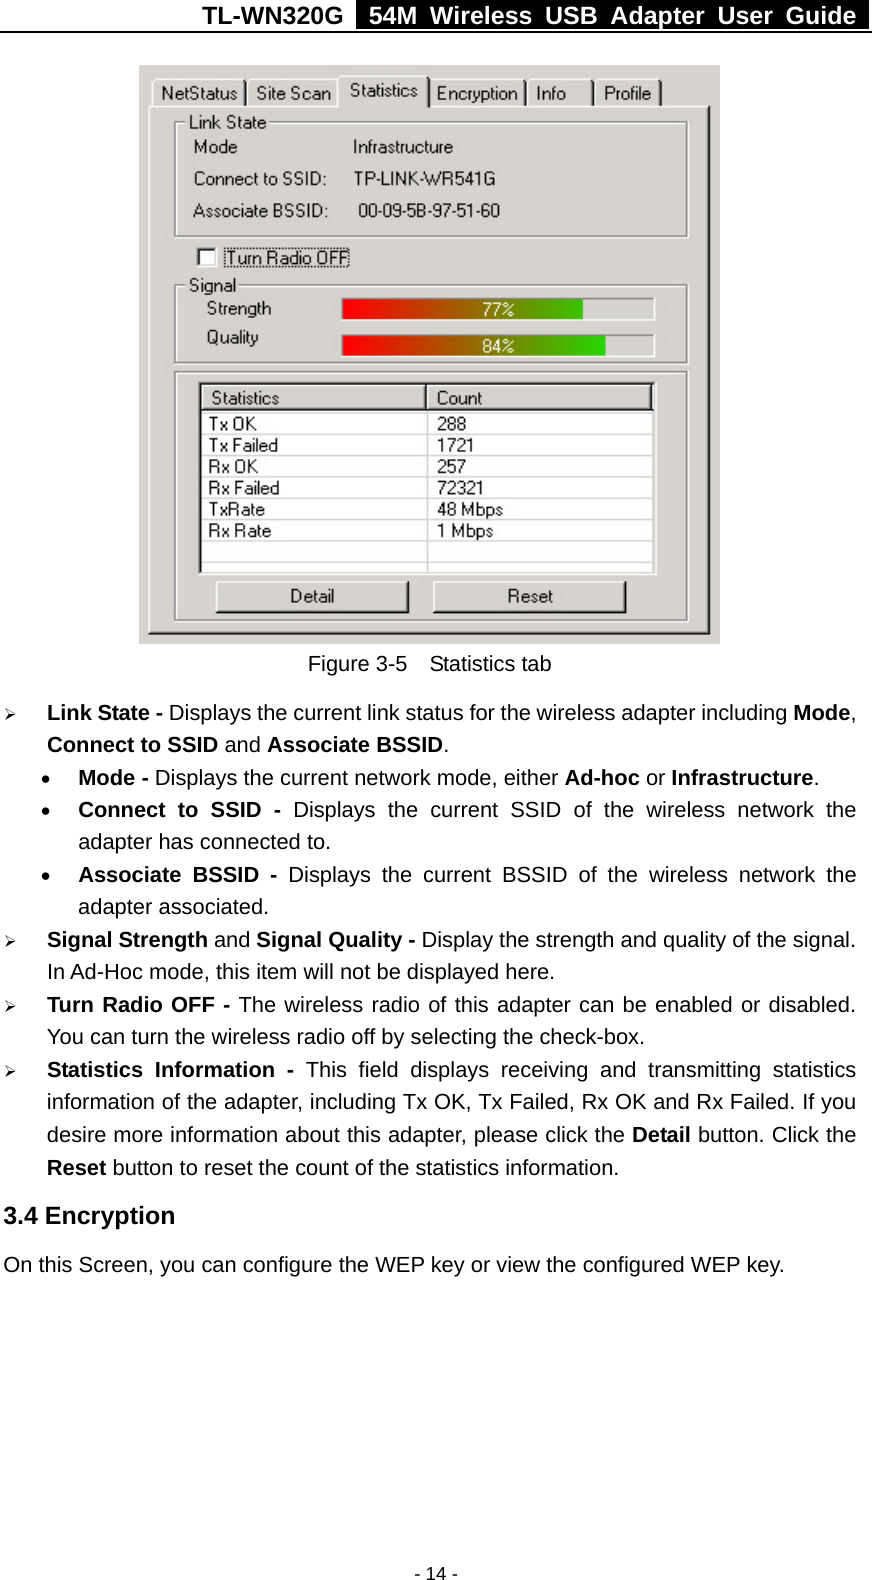 TL-WN320G   54M Wireless USB Adapter User Guide  - 14 -  Figure 3-5  Statistics tab ¾ Link State - Displays the current link status for the wireless adapter including Mode, Connect to SSID and Associate BSSID.  • Mode - Displays the current network mode, either Ad-hoc or Infrastructure. • Connect to SSID - Displays the current SSID of the wireless network the adapter has connected to.   • Associate BSSID - Displays the current BSSID of the wireless network the adapter associated. ¾ Signal Strength and Signal Quality - Display the strength and quality of the signal. In Ad-Hoc mode, this item will not be displayed here. ¾ Turn Radio OFF - The wireless radio of this adapter can be enabled or disabled. You can turn the wireless radio off by selecting the check-box. ¾ Statistics Information - This field displays receiving and transmitting statistics information of the adapter, including Tx OK, Tx Failed, Rx OK and Rx Failed. If you desire more information about this adapter, please click the Detail button. Click the Reset button to reset the count of the statistics information. 3.4 Encryption On this Screen, you can configure the WEP key or view the configured WEP key. 